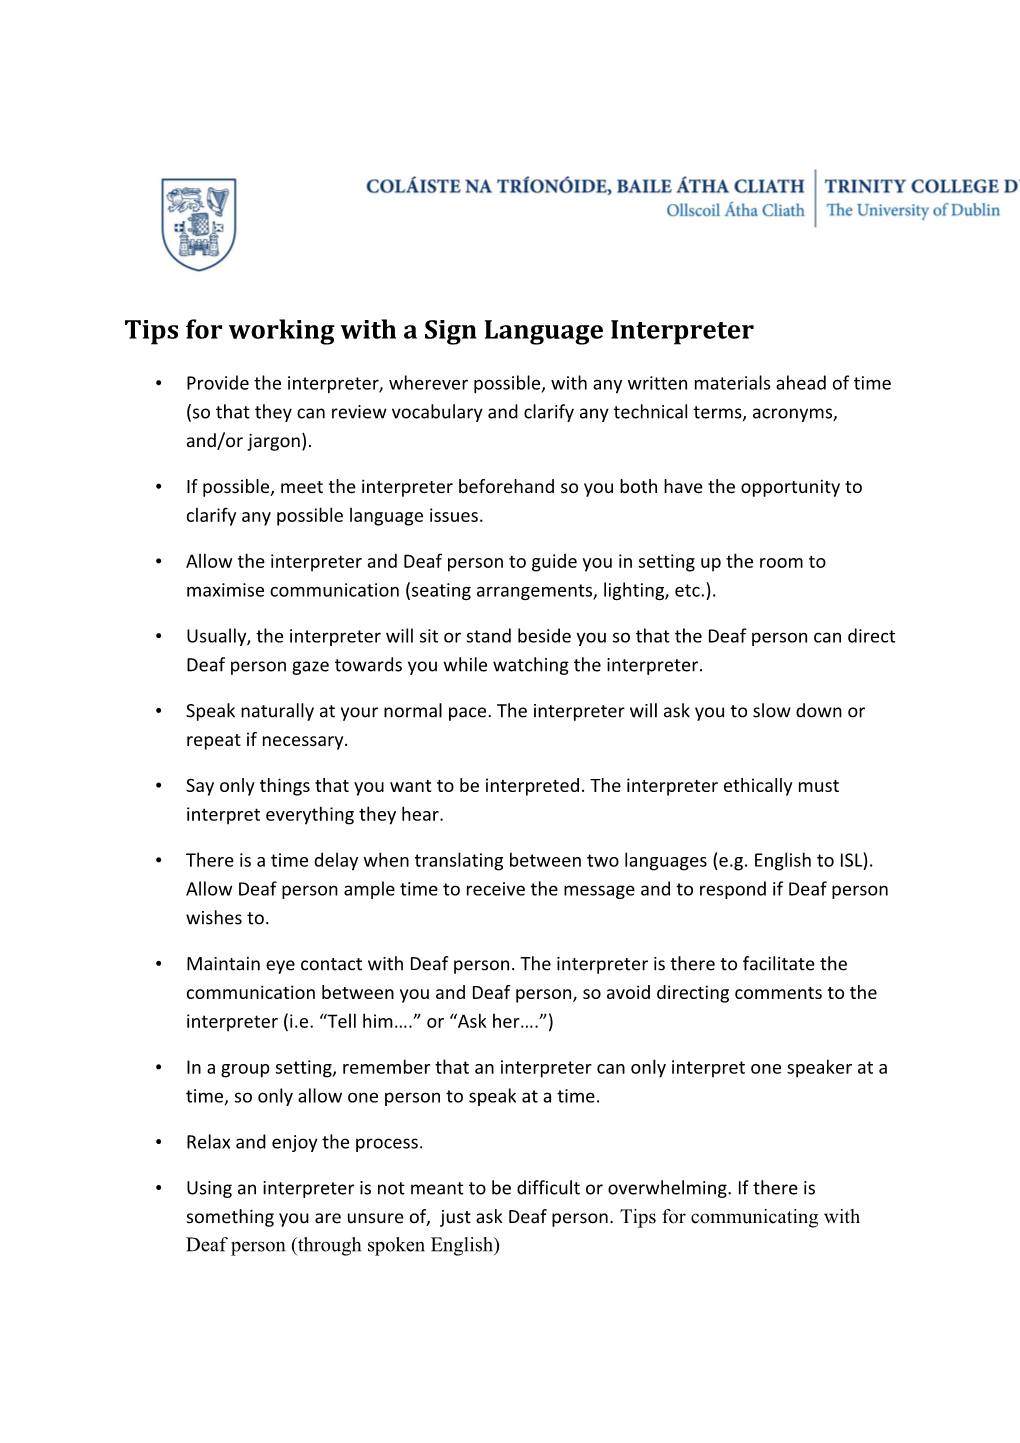 Tips for Working with a Sign Language Interpreter